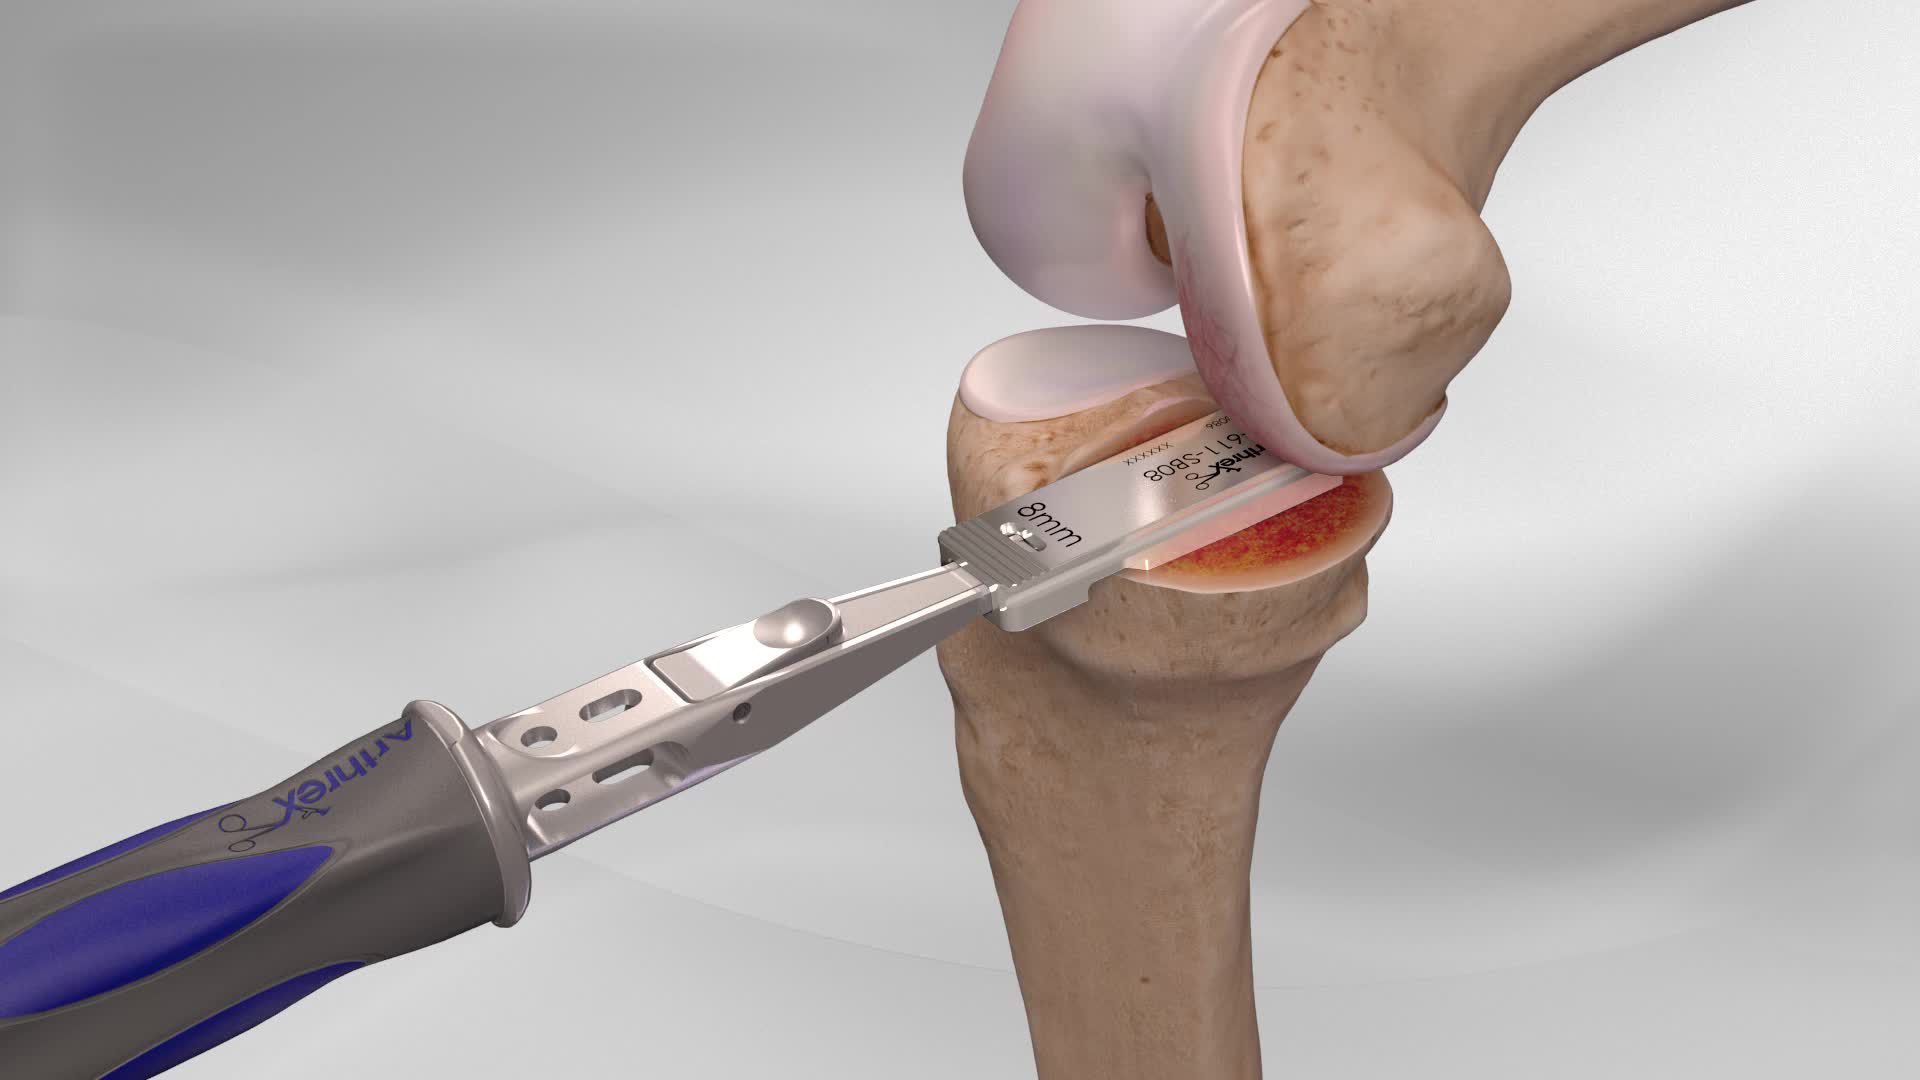 Partial Knee Replacement with the iBalance